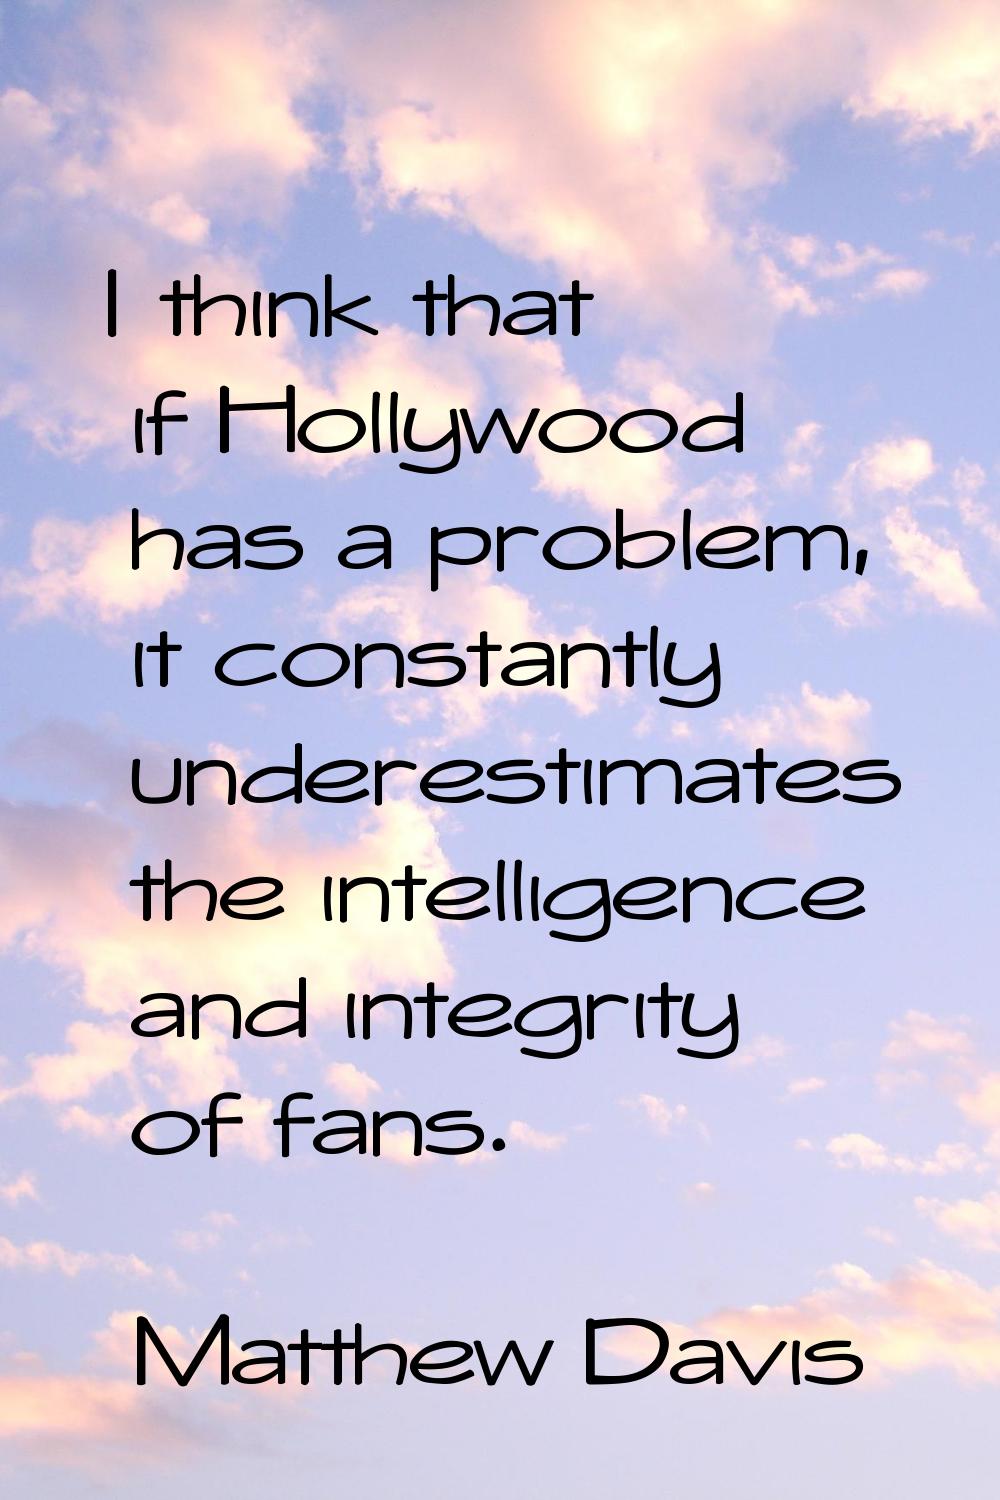 I think that if Hollywood has a problem, it constantly underestimates the intelligence and integrit